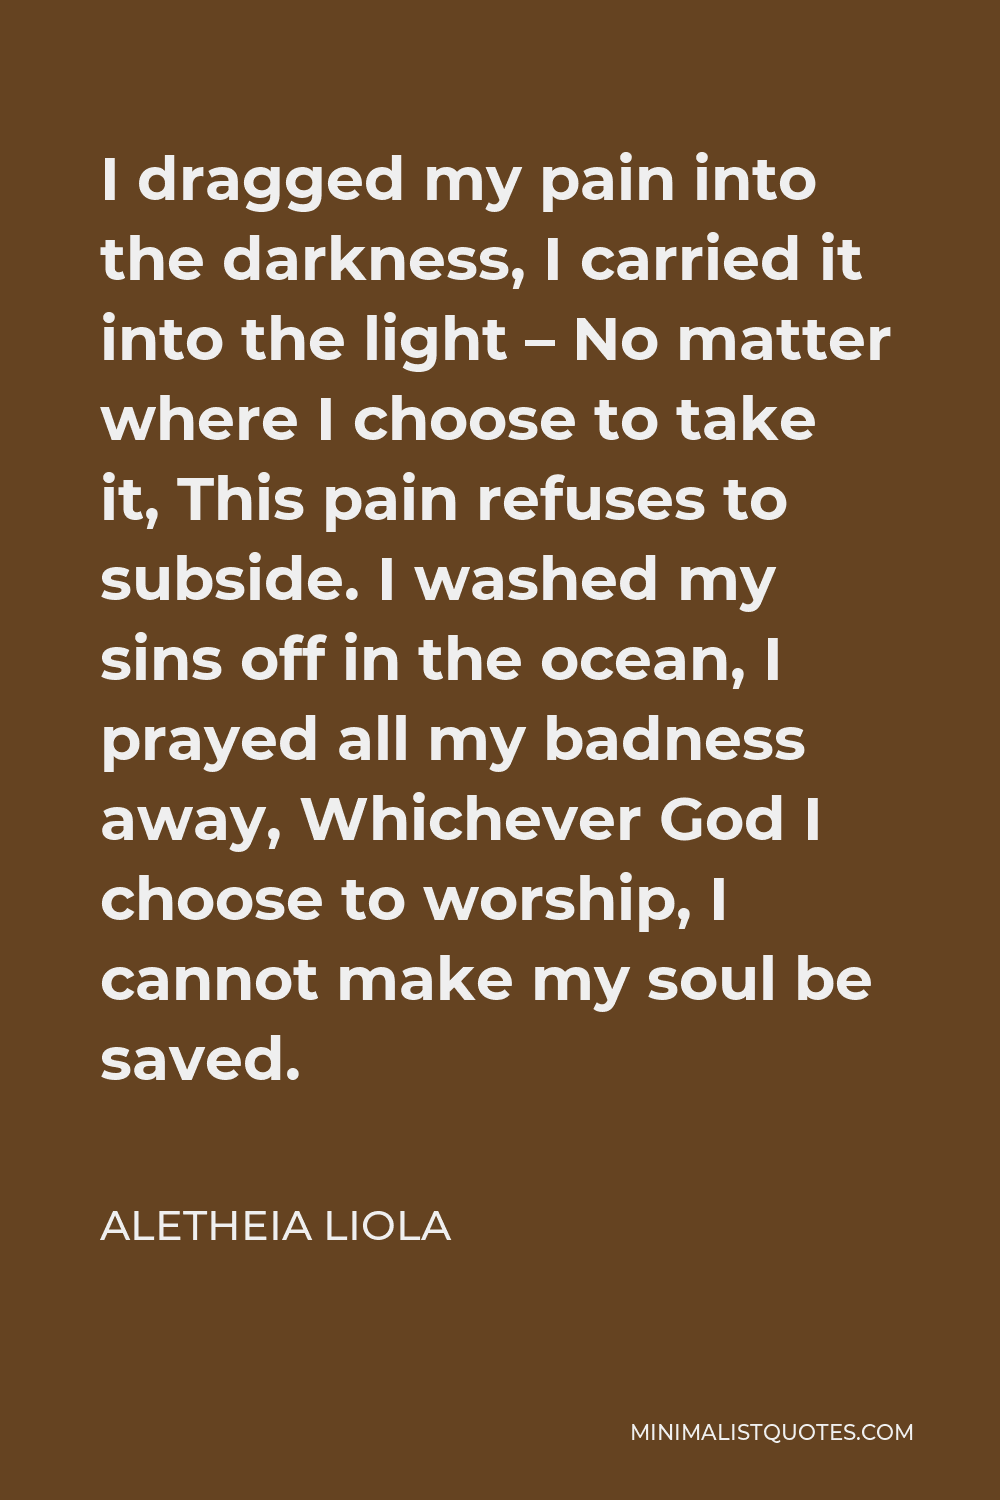 Aletheia Liola Quote - I dragged my pain into the darkness, I carried it into the light – No matter where I choose to take it, This pain refuses to subside. I washed my sins off in the ocean, I prayed all my badness away, Whichever God I choose to worship, I cannot make my soul be saved.